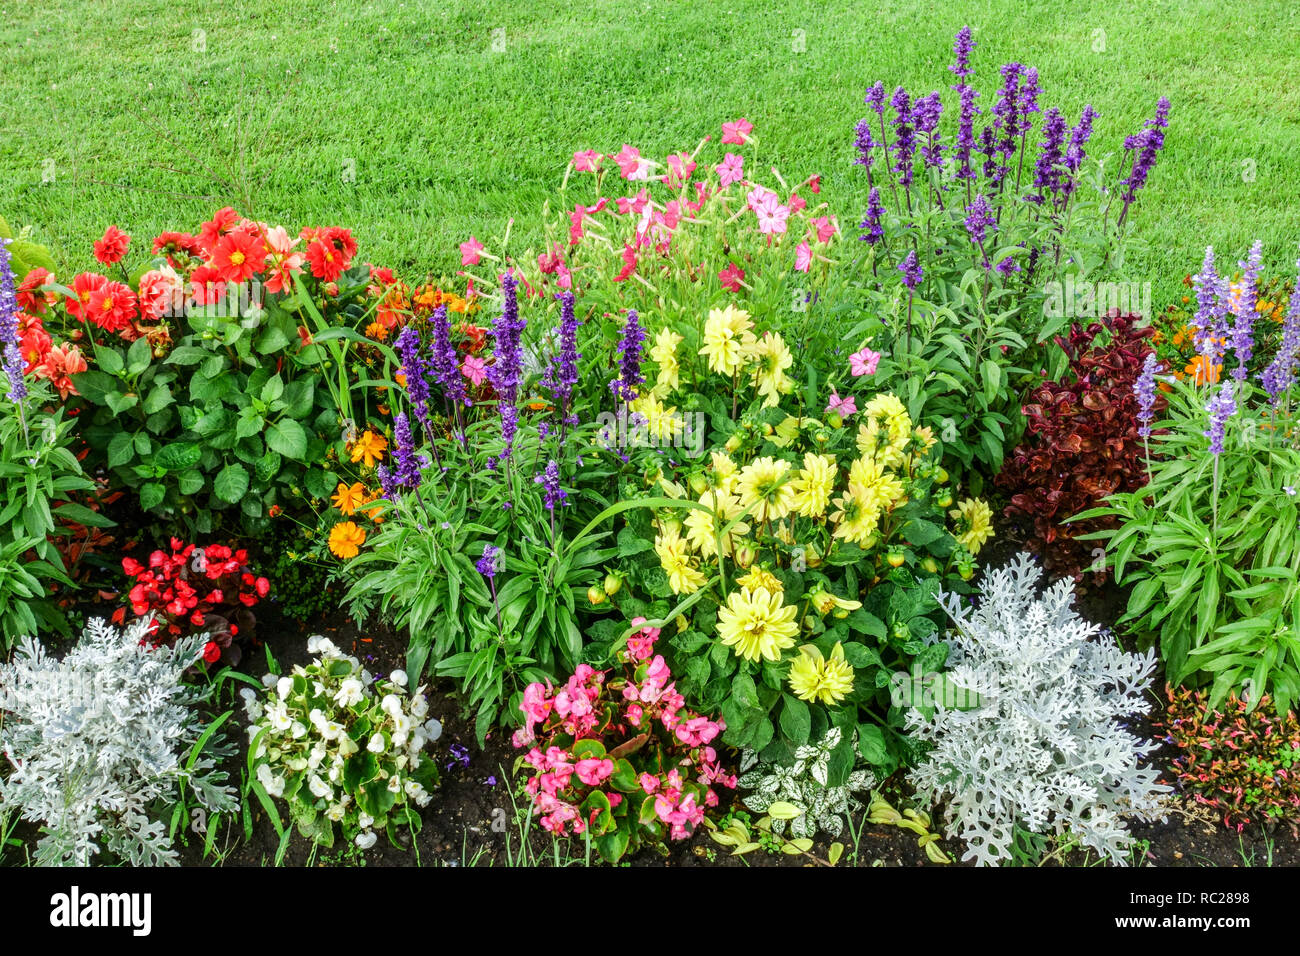 Annuals bed flowers garden hardy annuals mixed border flowerbed bedding dahlias Stock Photo